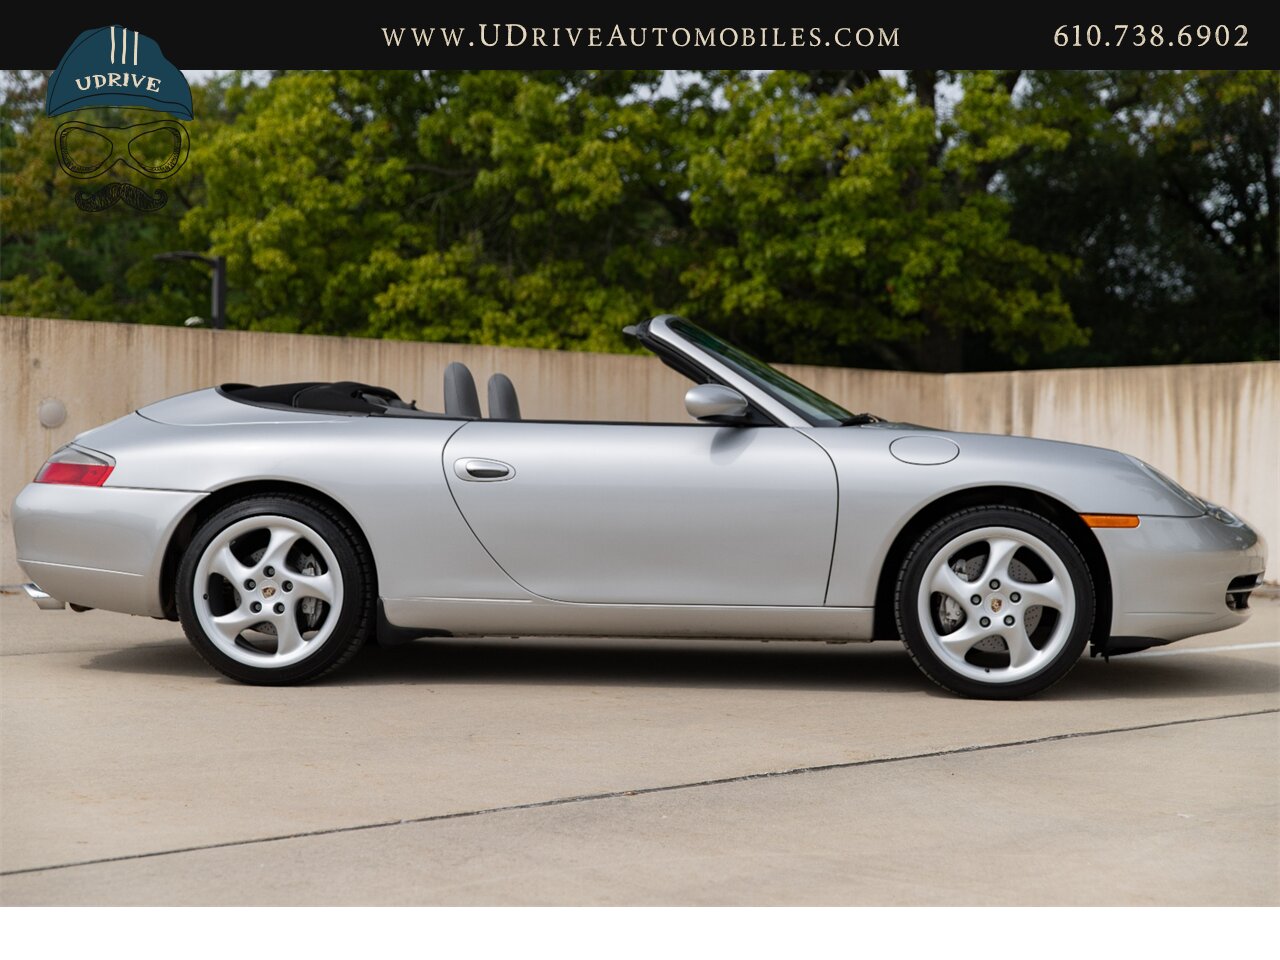 2001 Porsche 911 Carrera 4 Cabriolet Tiptronic IMS Upgrade  Power Seats 18in Turbo Look Wheels 2 Owners $5k Recent Service - Photo 19 - West Chester, PA 19382